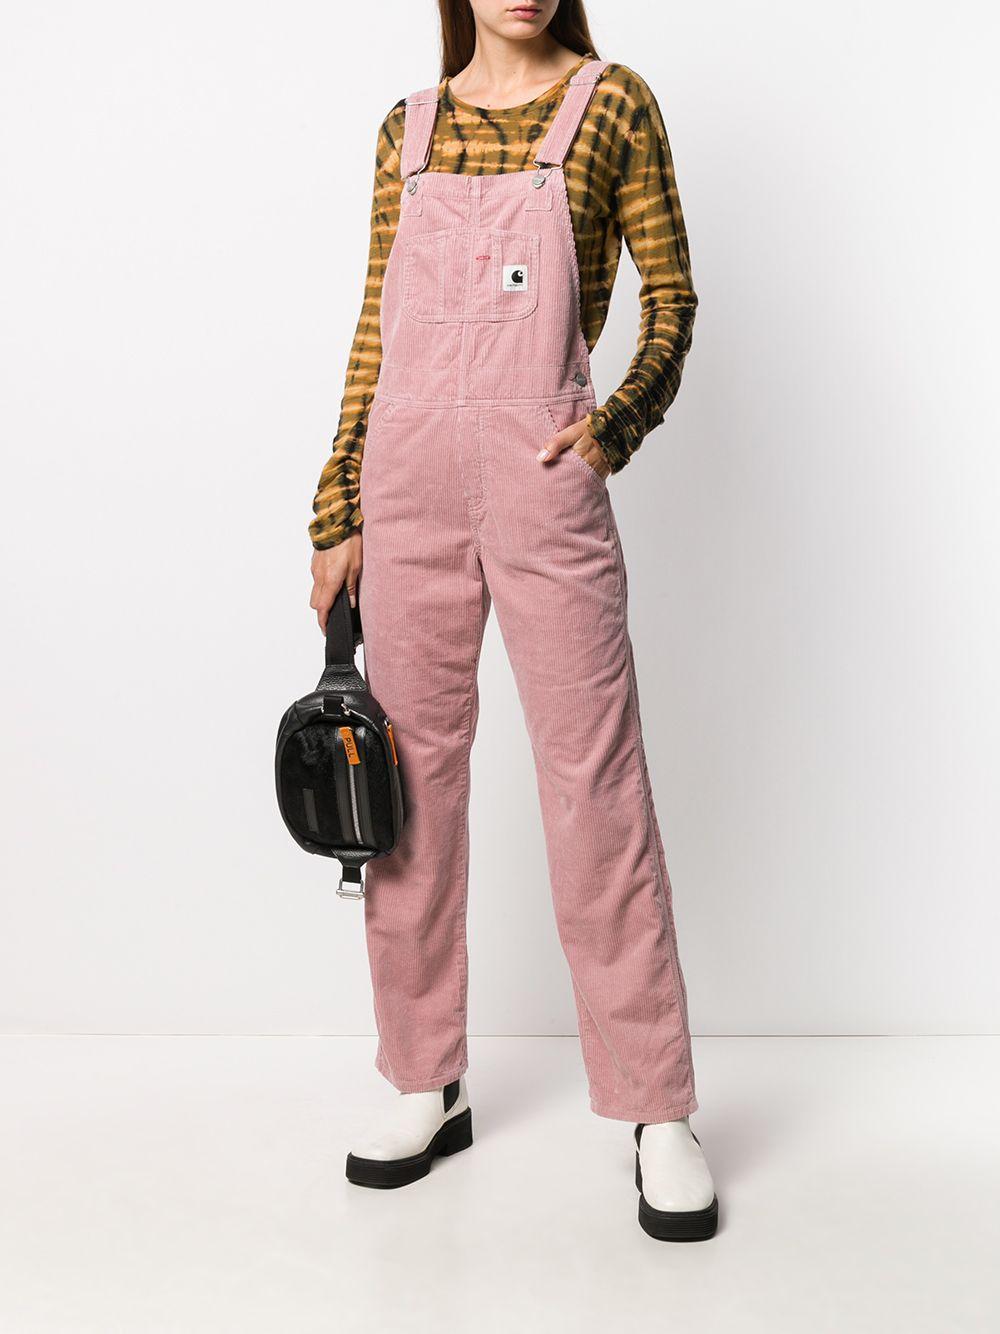 Carhartt WIP Cotton Cord Full-length Dungarees in Pink - Lyst